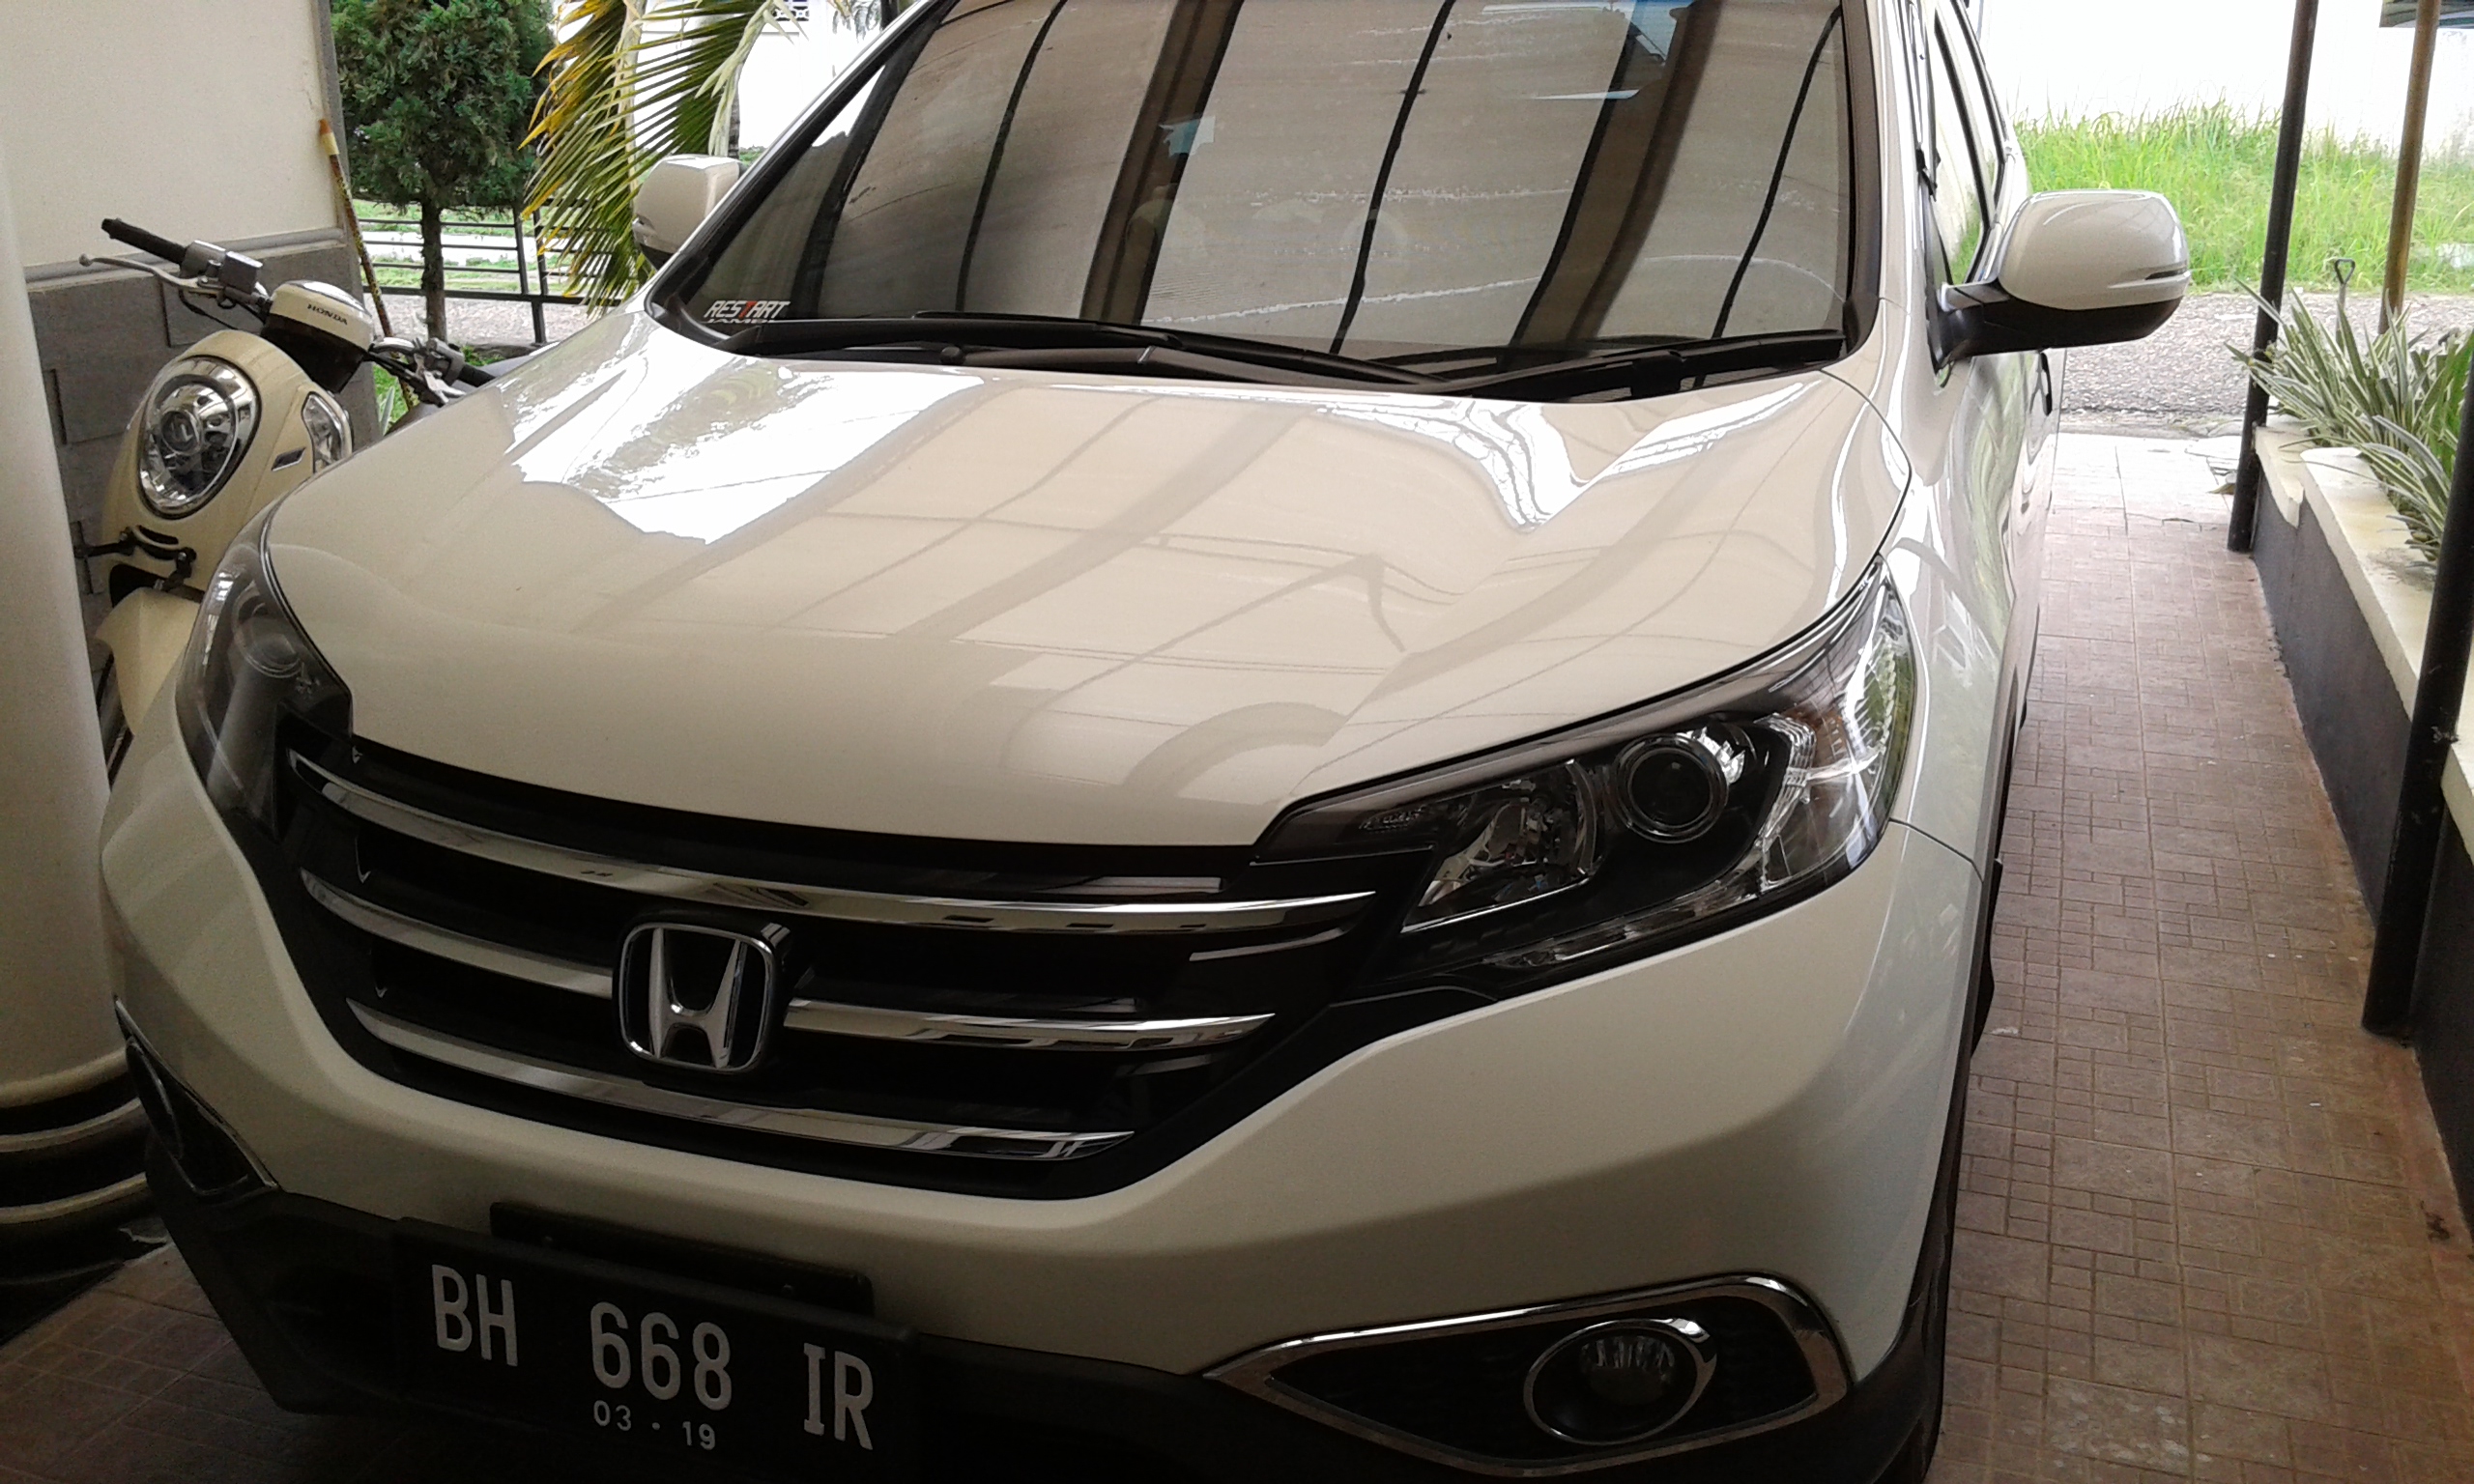 2014 Honda CRV Specifications, Pricing, Pictures and Videos